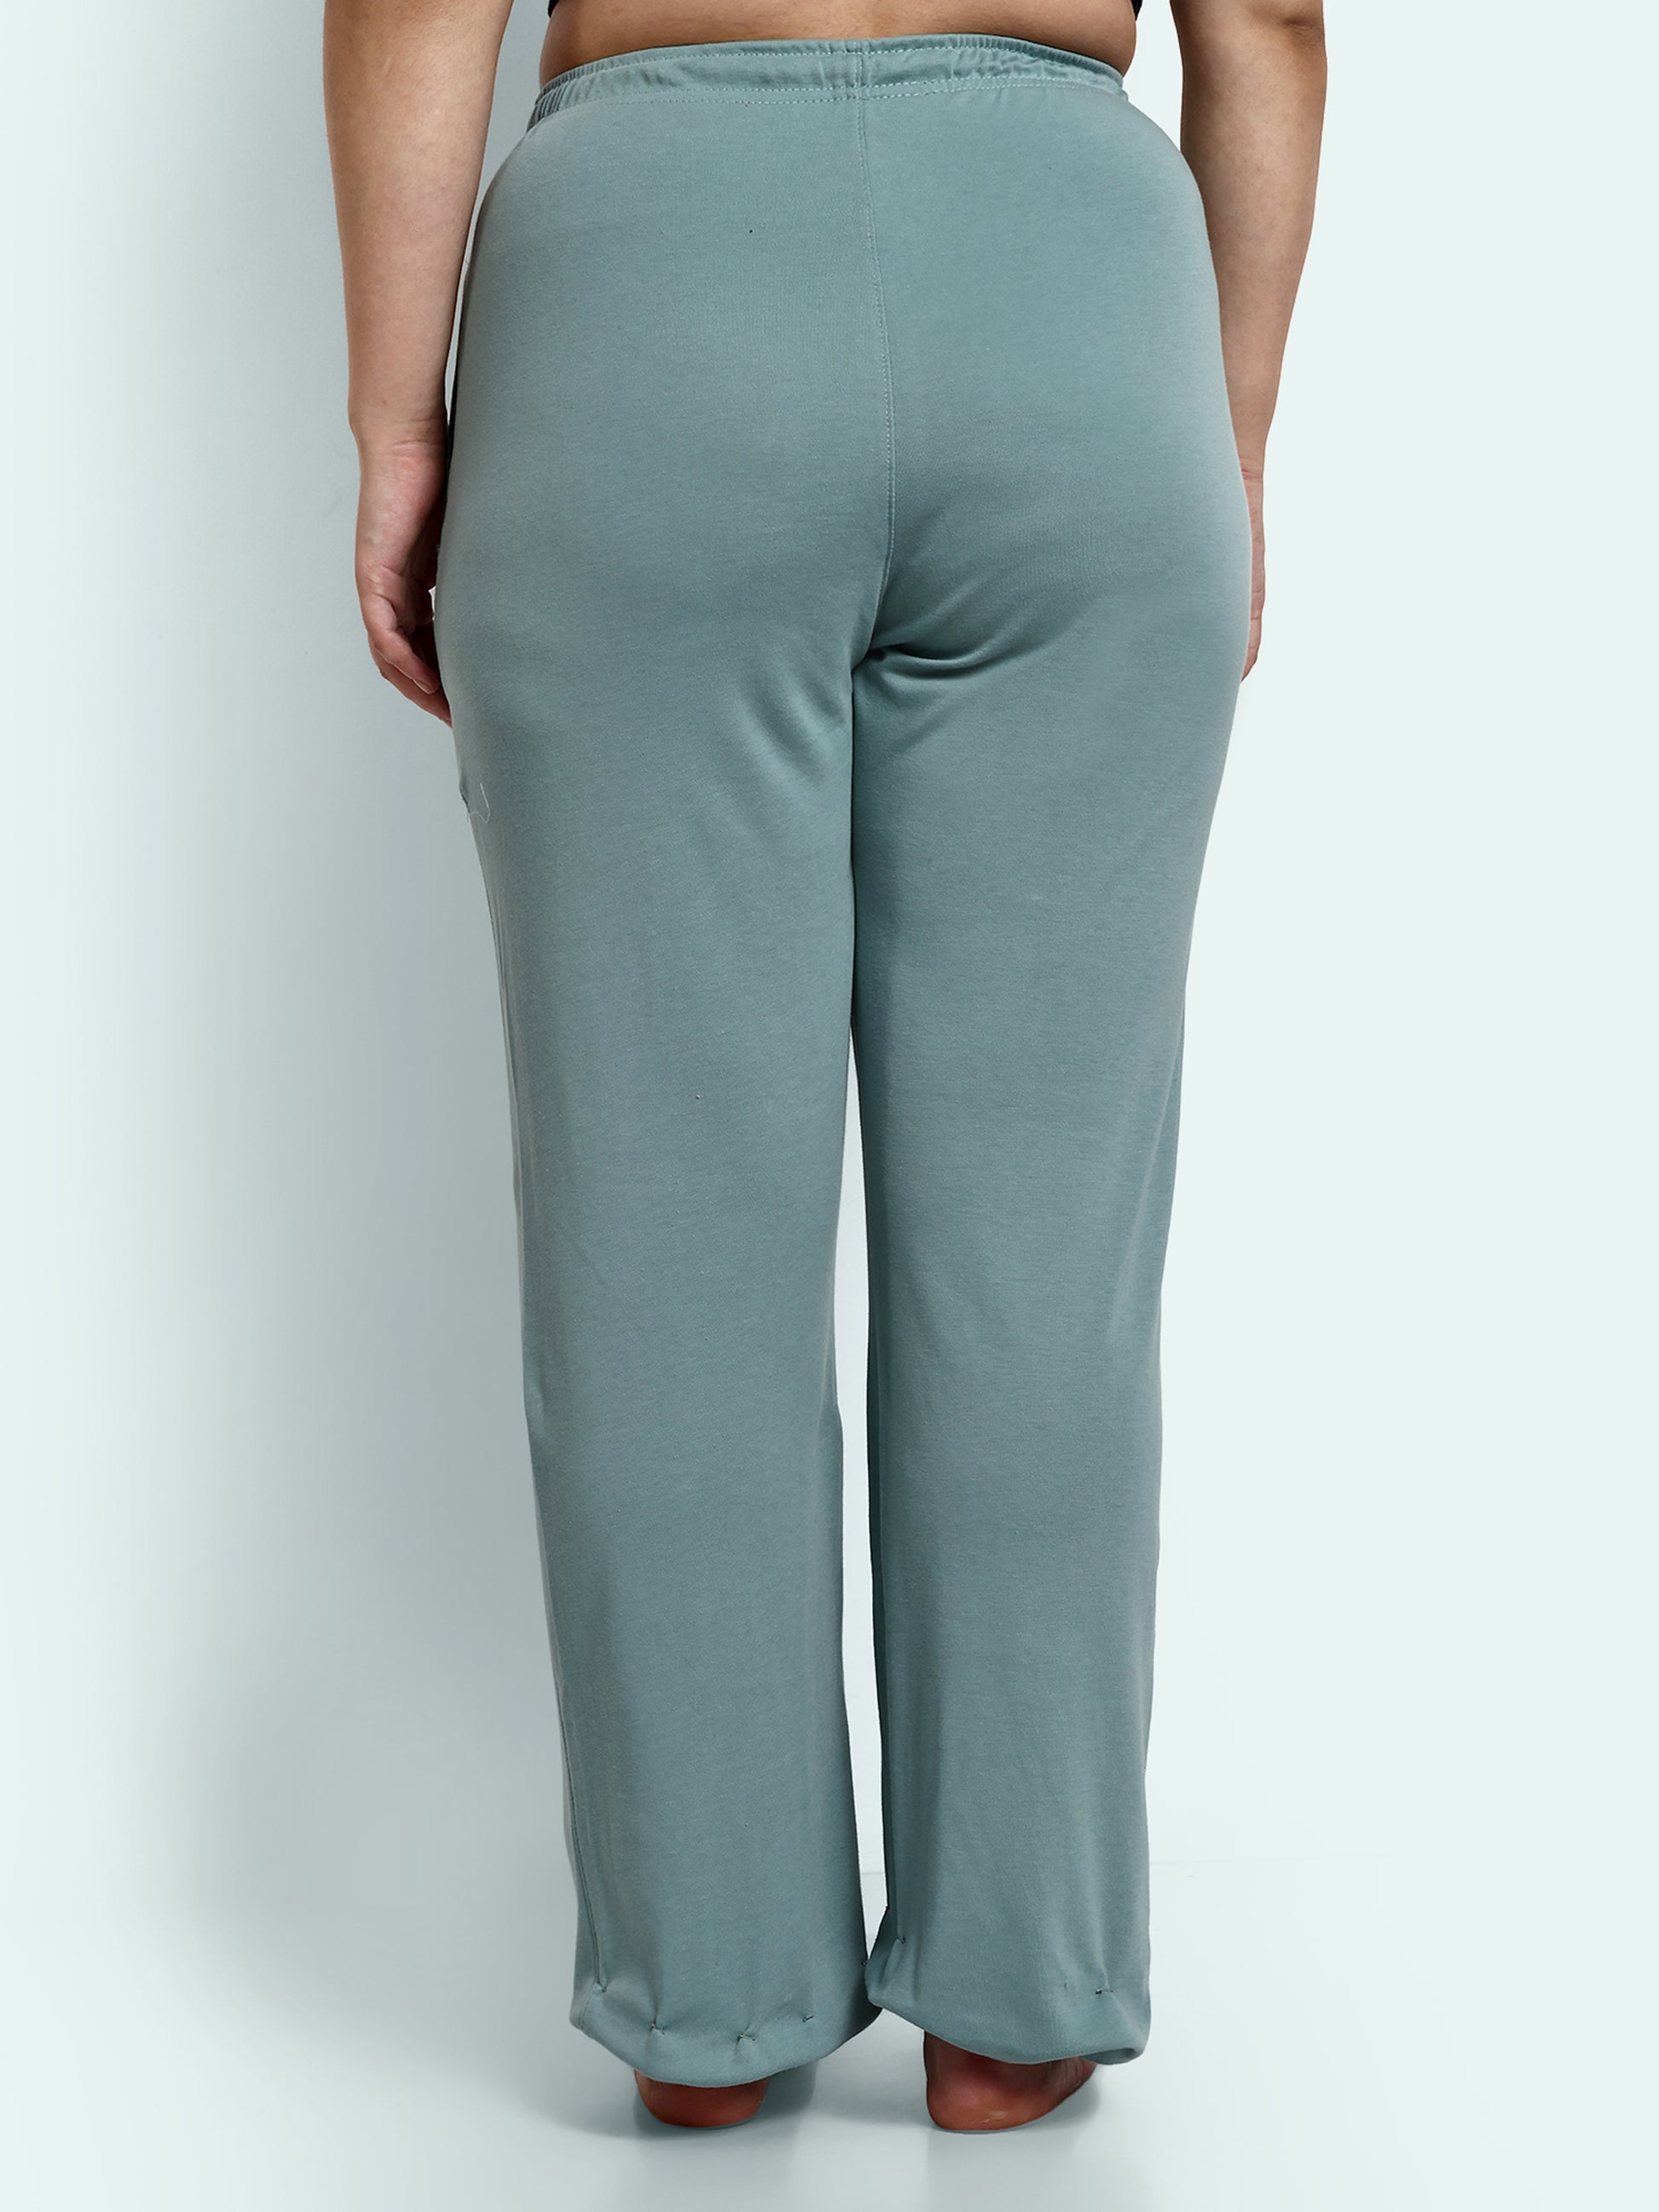 Comfortable High Waist Cotton Flared Pants For Women in Sage online at best prices